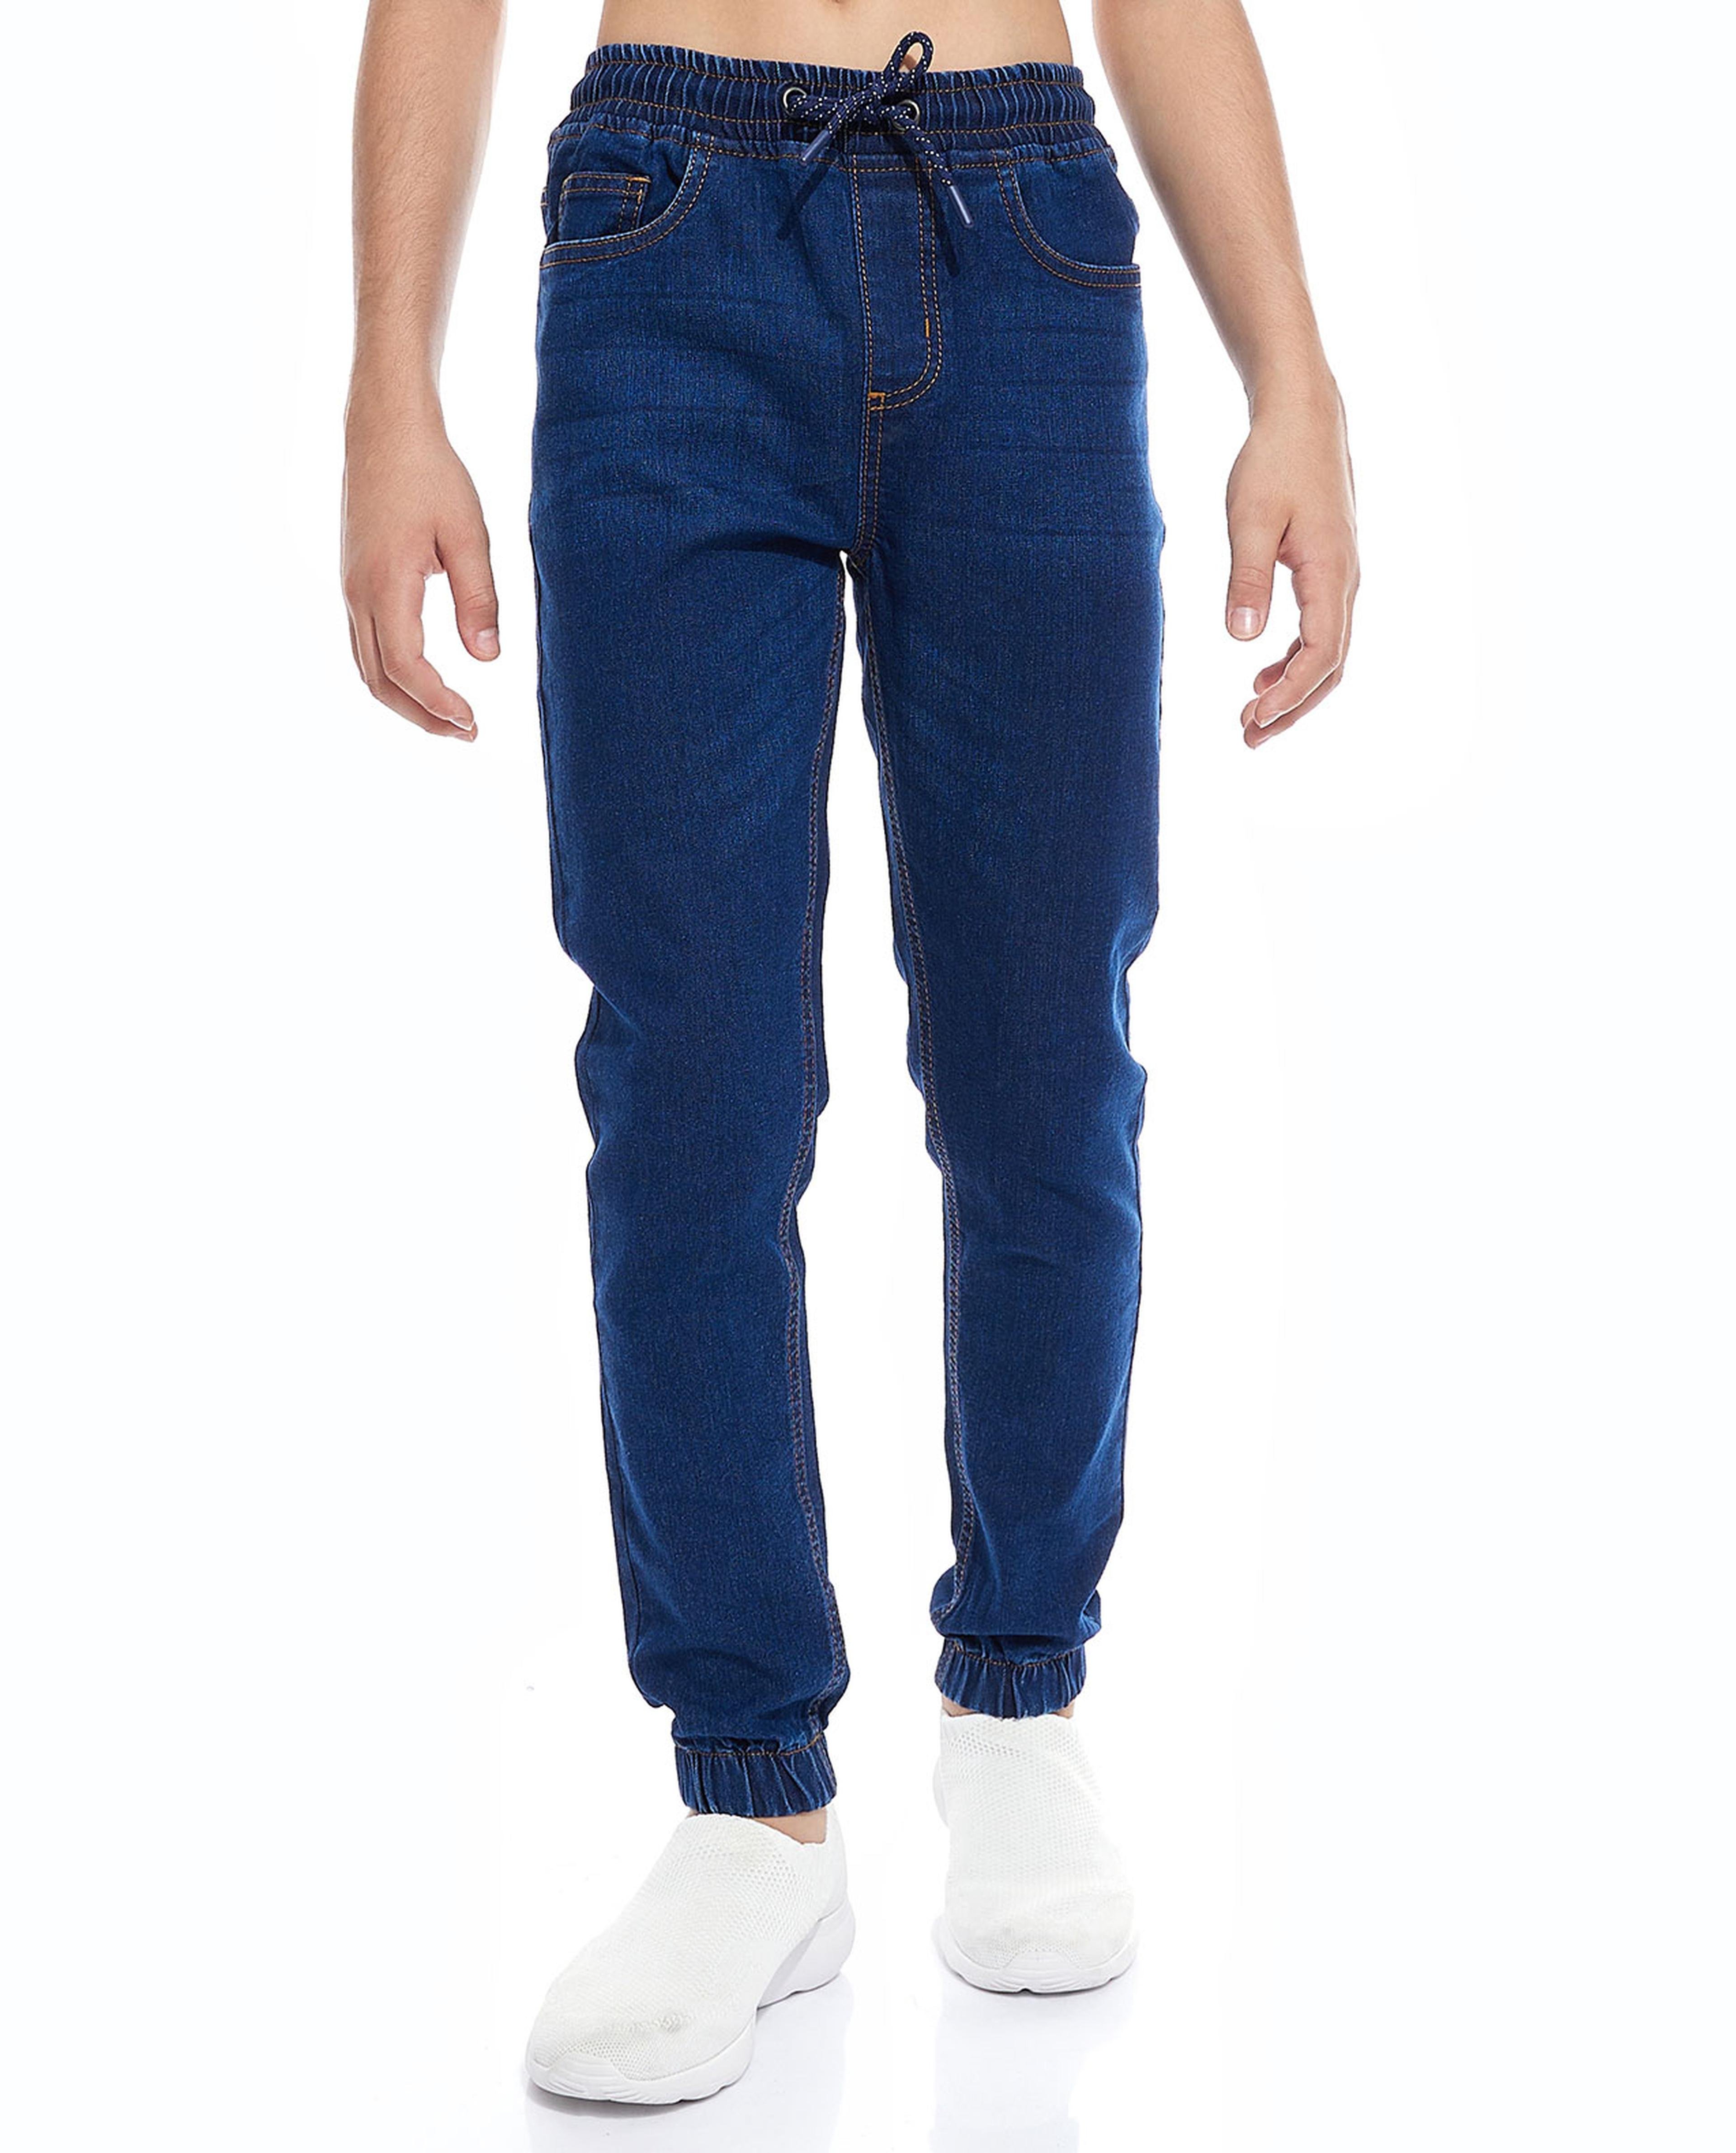 Washed Jeans with Drawstring Waist